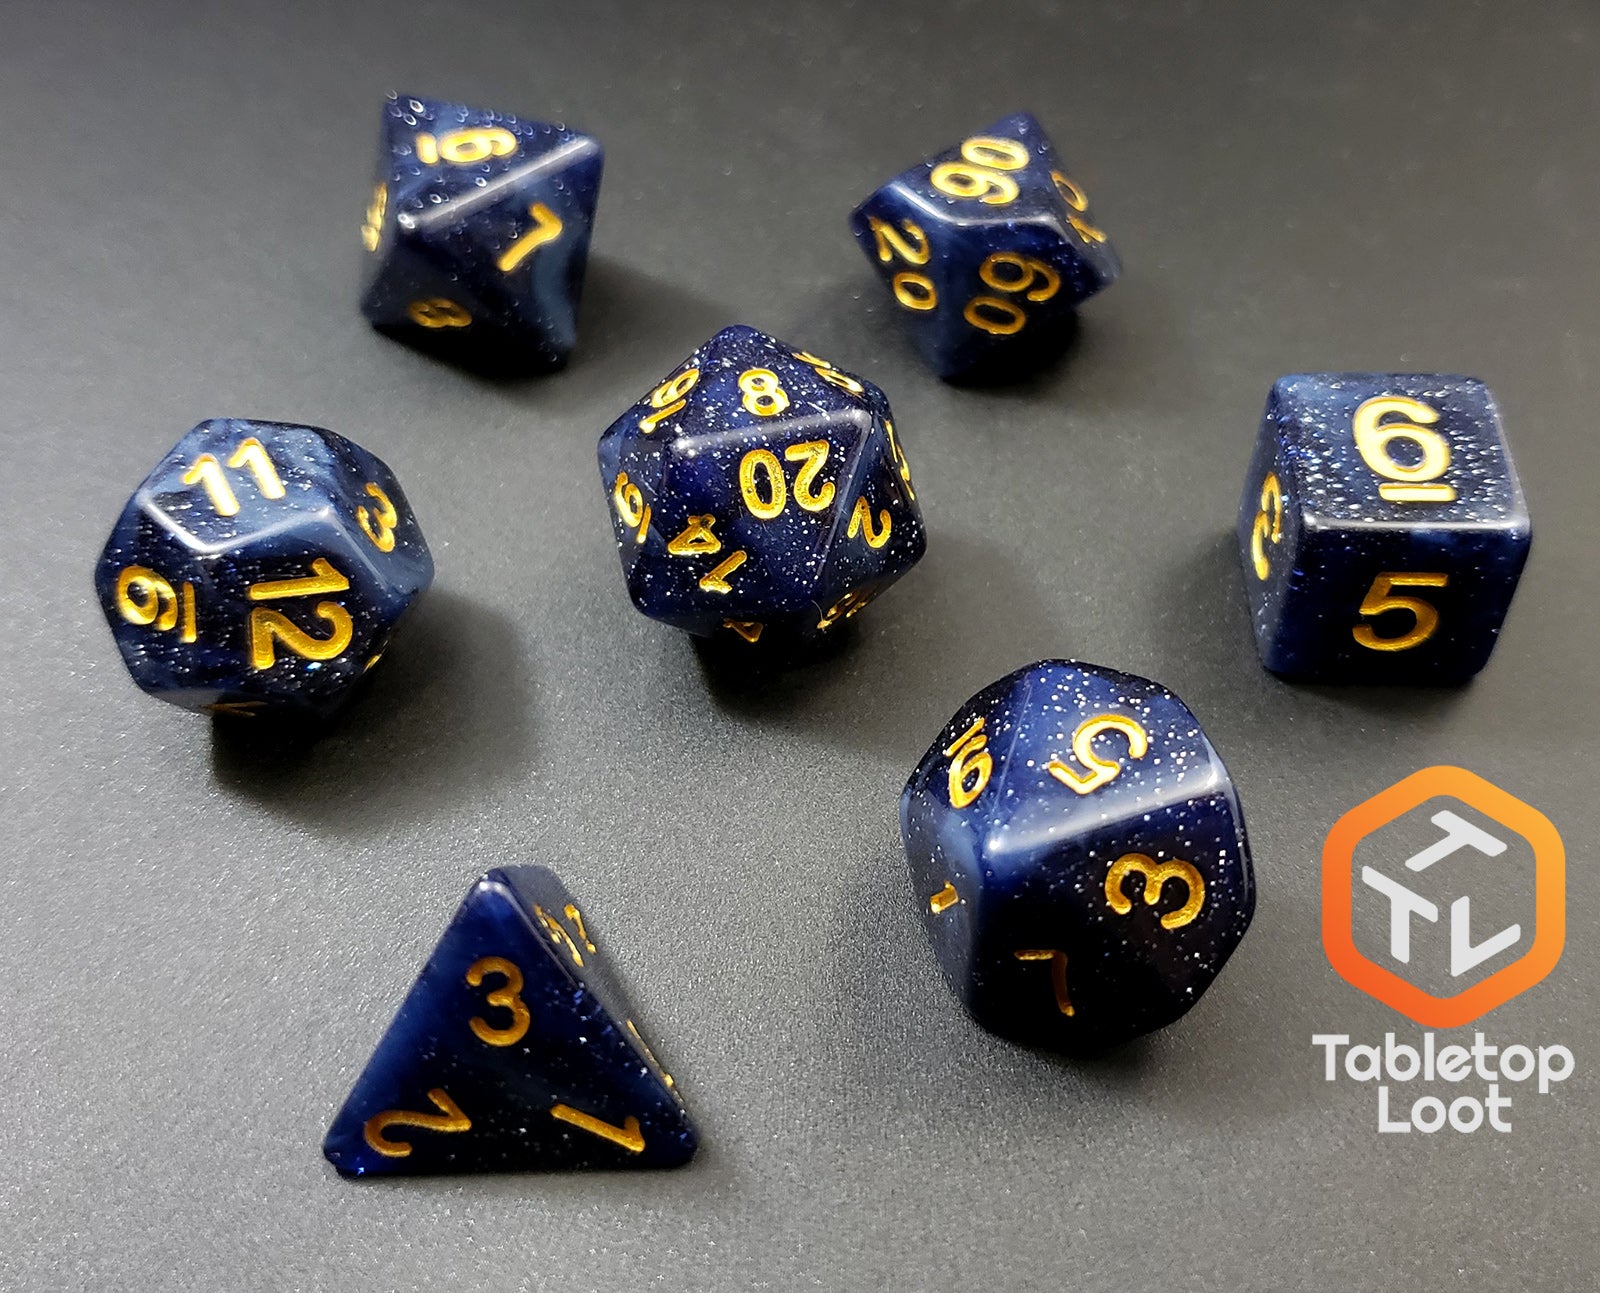 The Starry Twilight 7 piece dice set from Tabletop Loot, with an opaque deep navy resin filled with gold glitter and inked in gold.